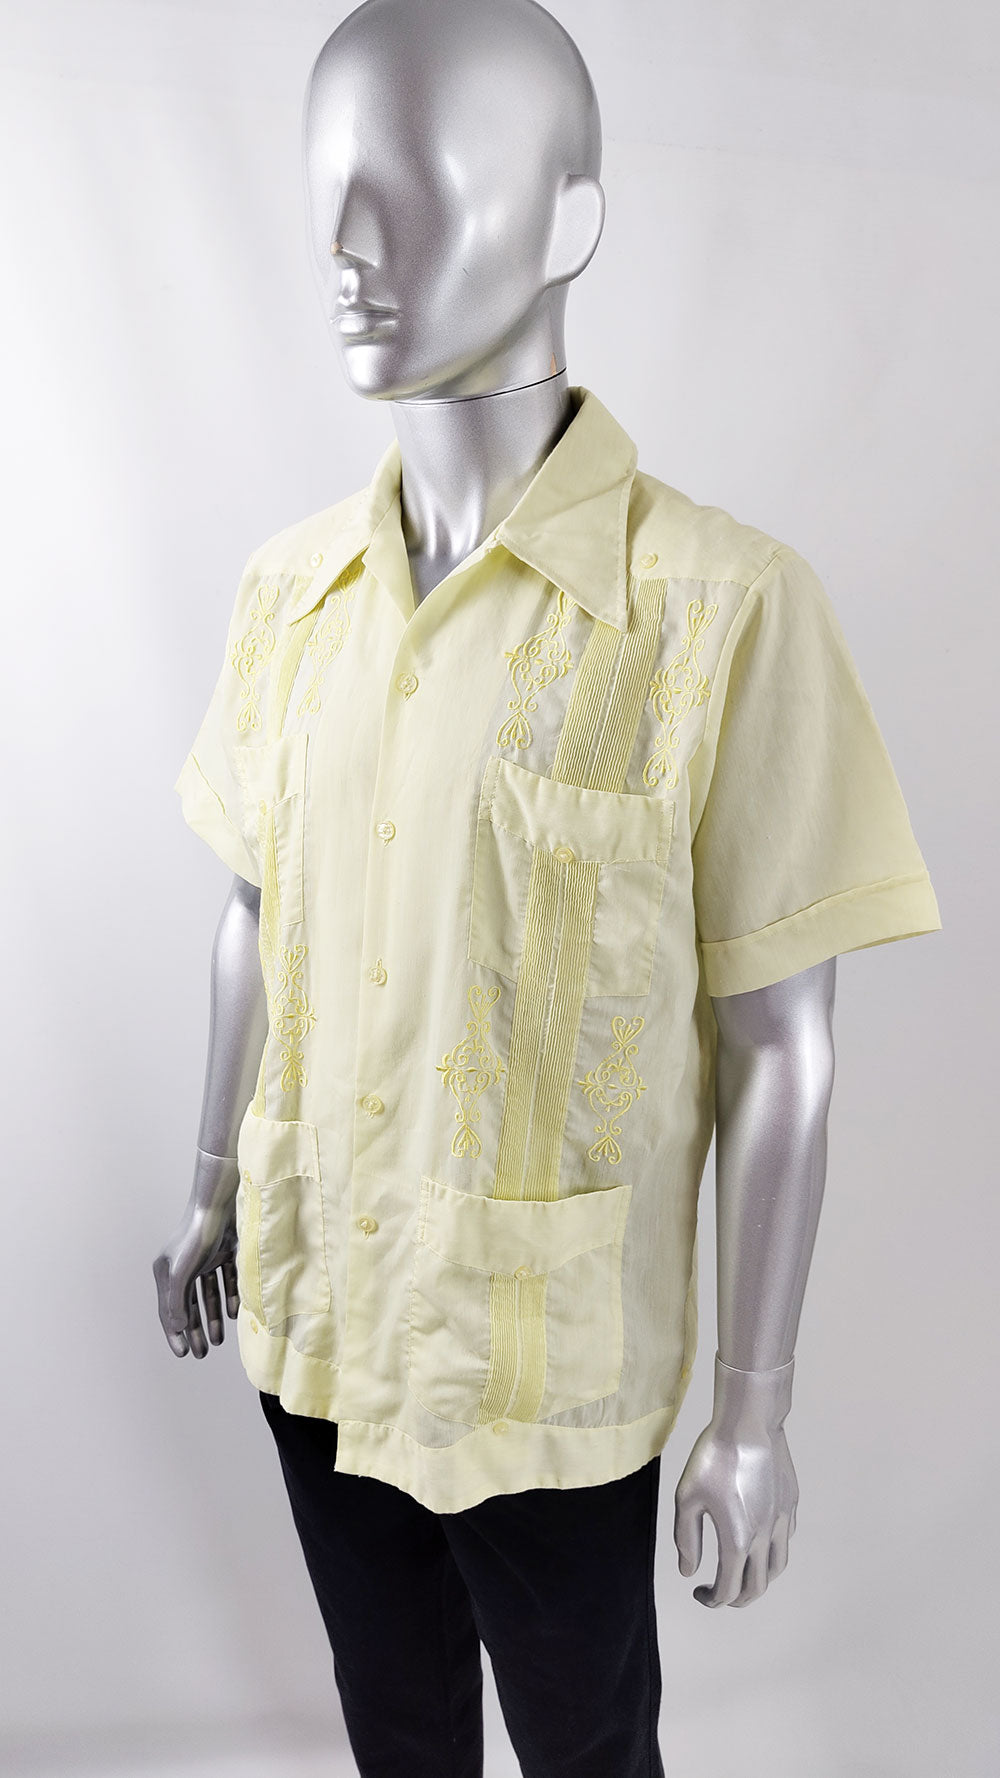 A vintage vacation shirt in a pale yellow see through cotton blend fabric.